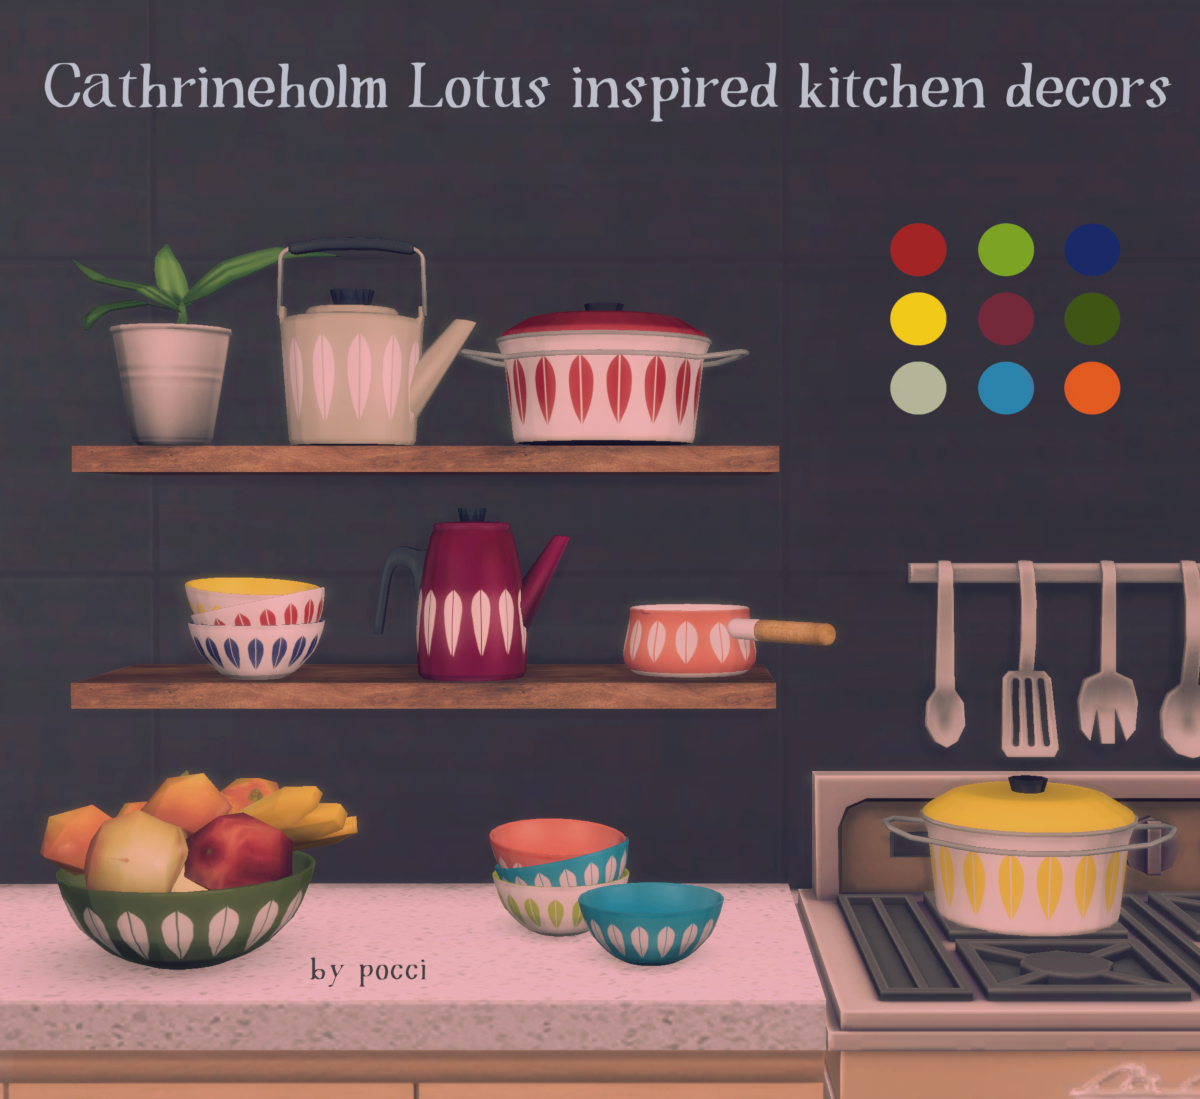 Cathrineholm Lotus inspired kitchen decors - The Sims 4 Build / Buy ...